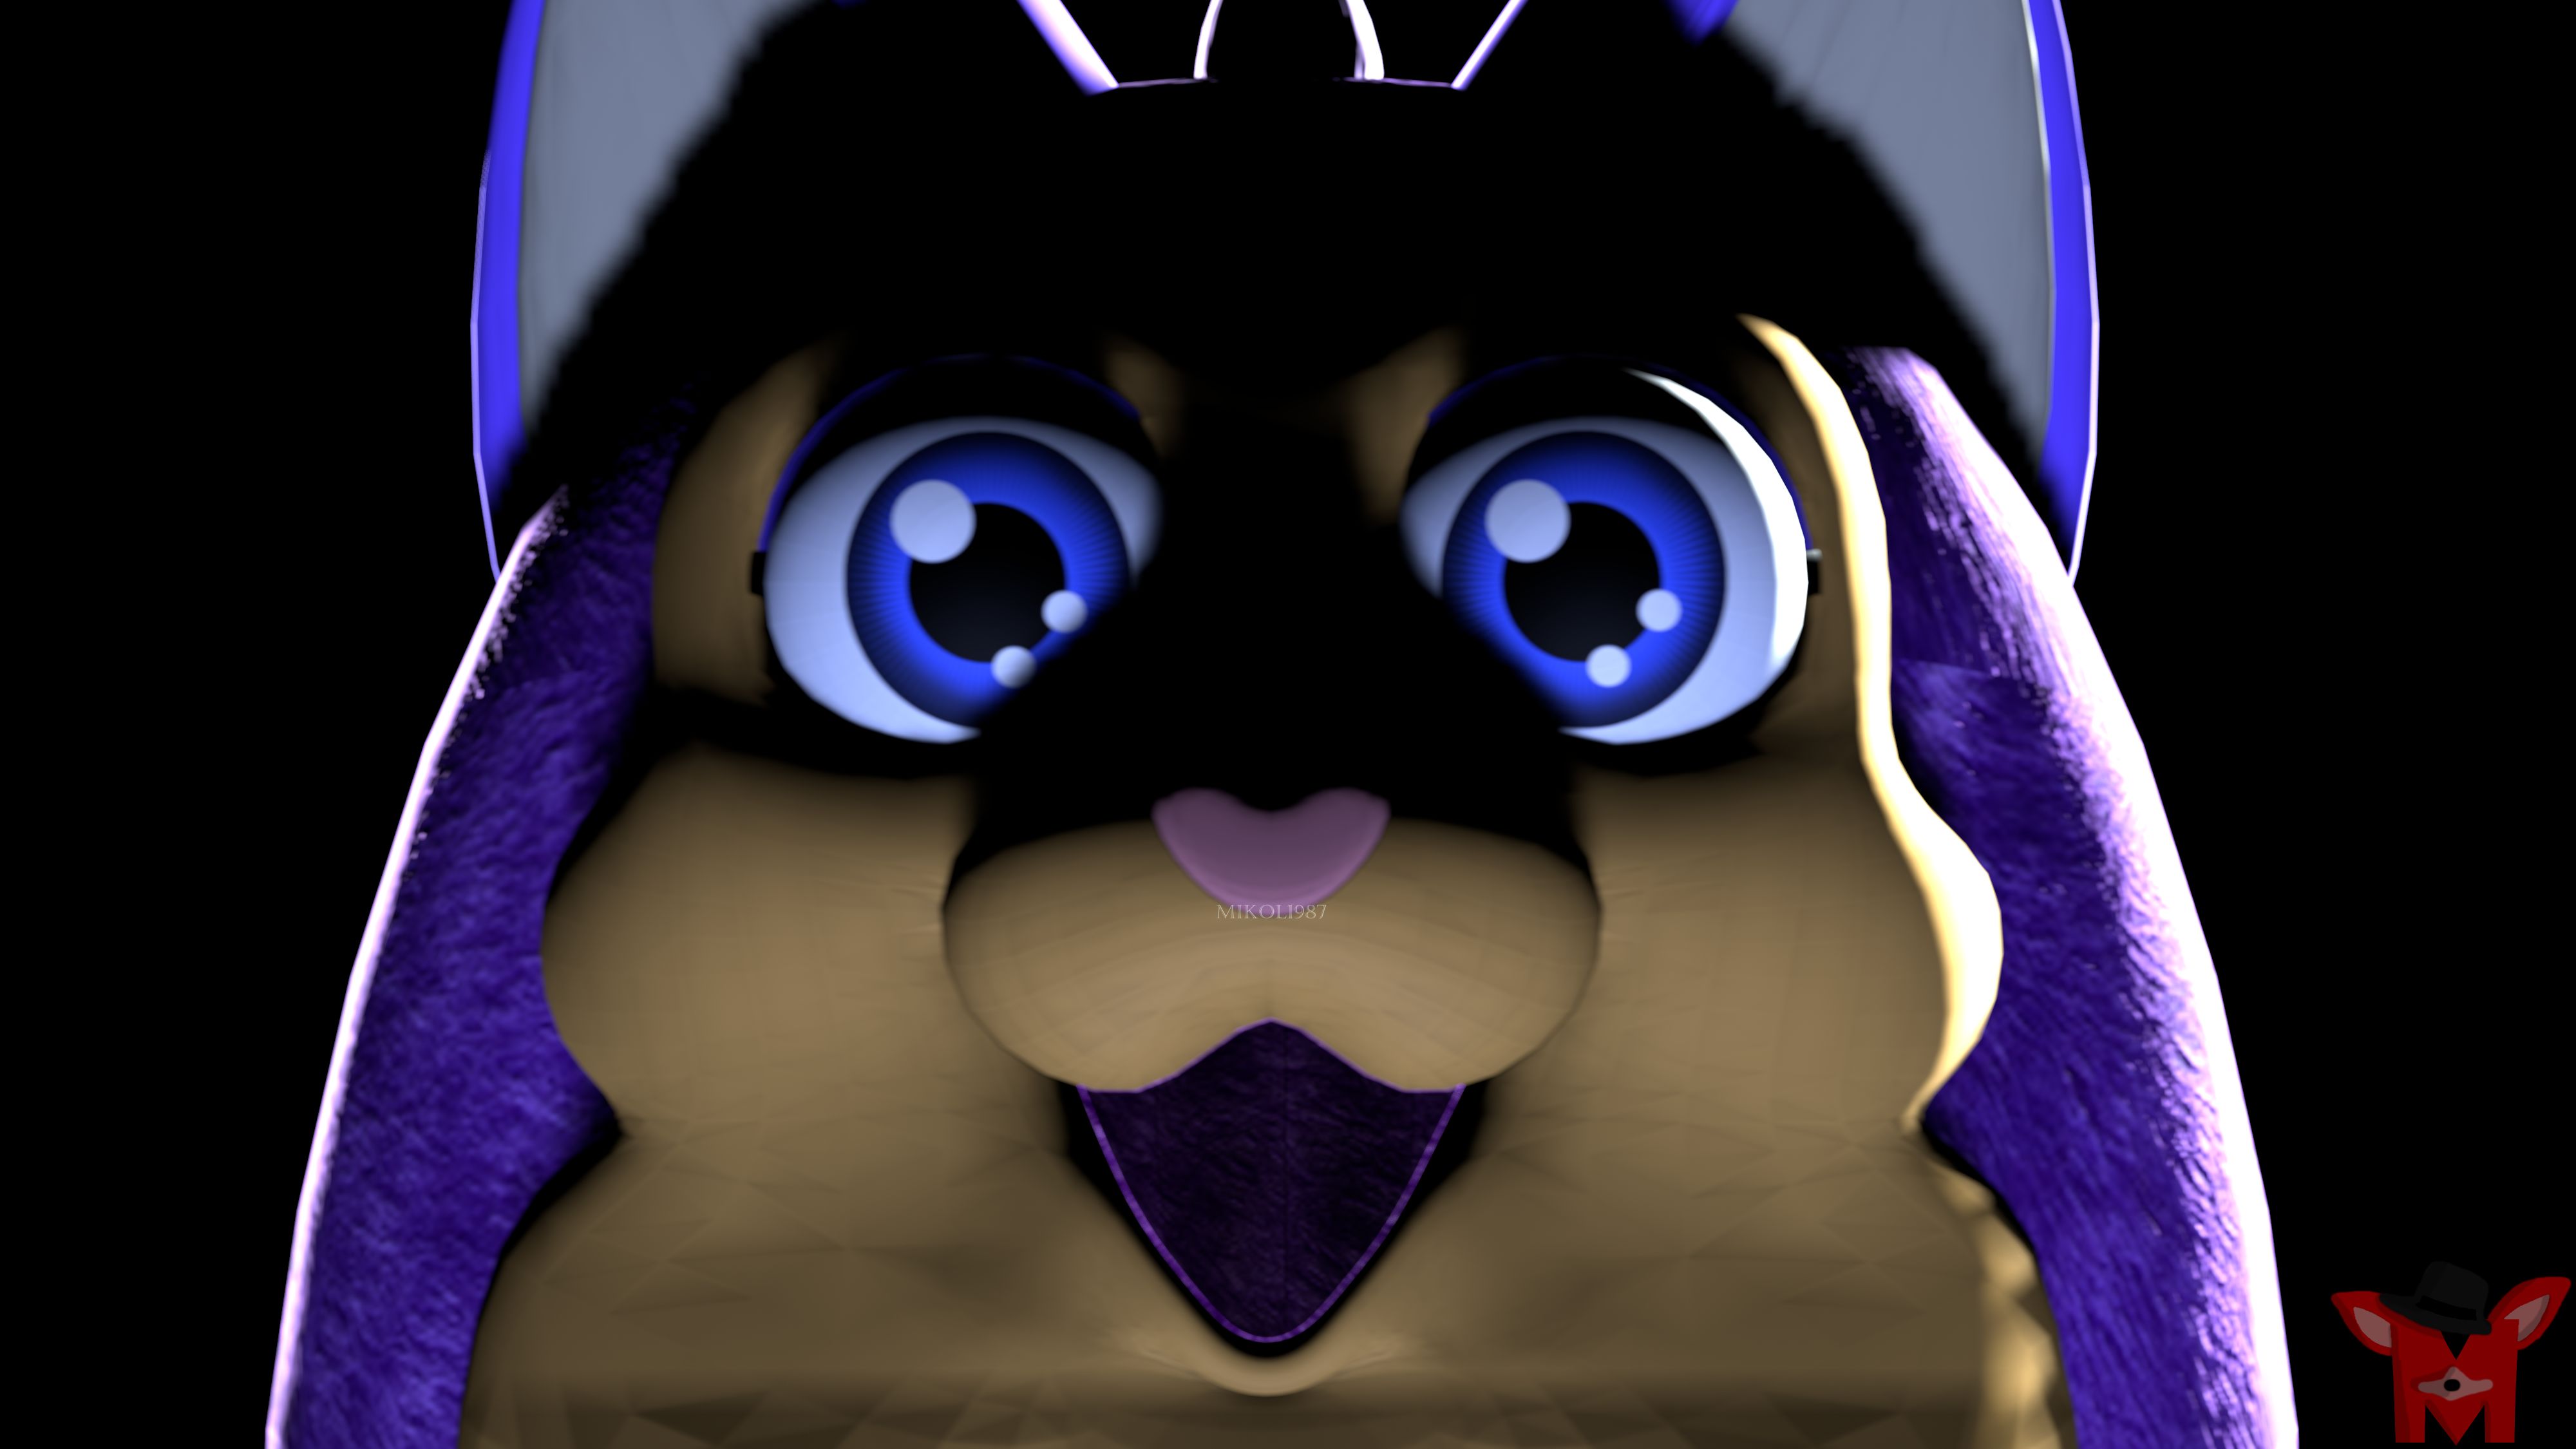 Tattletail is coming to Mobile!